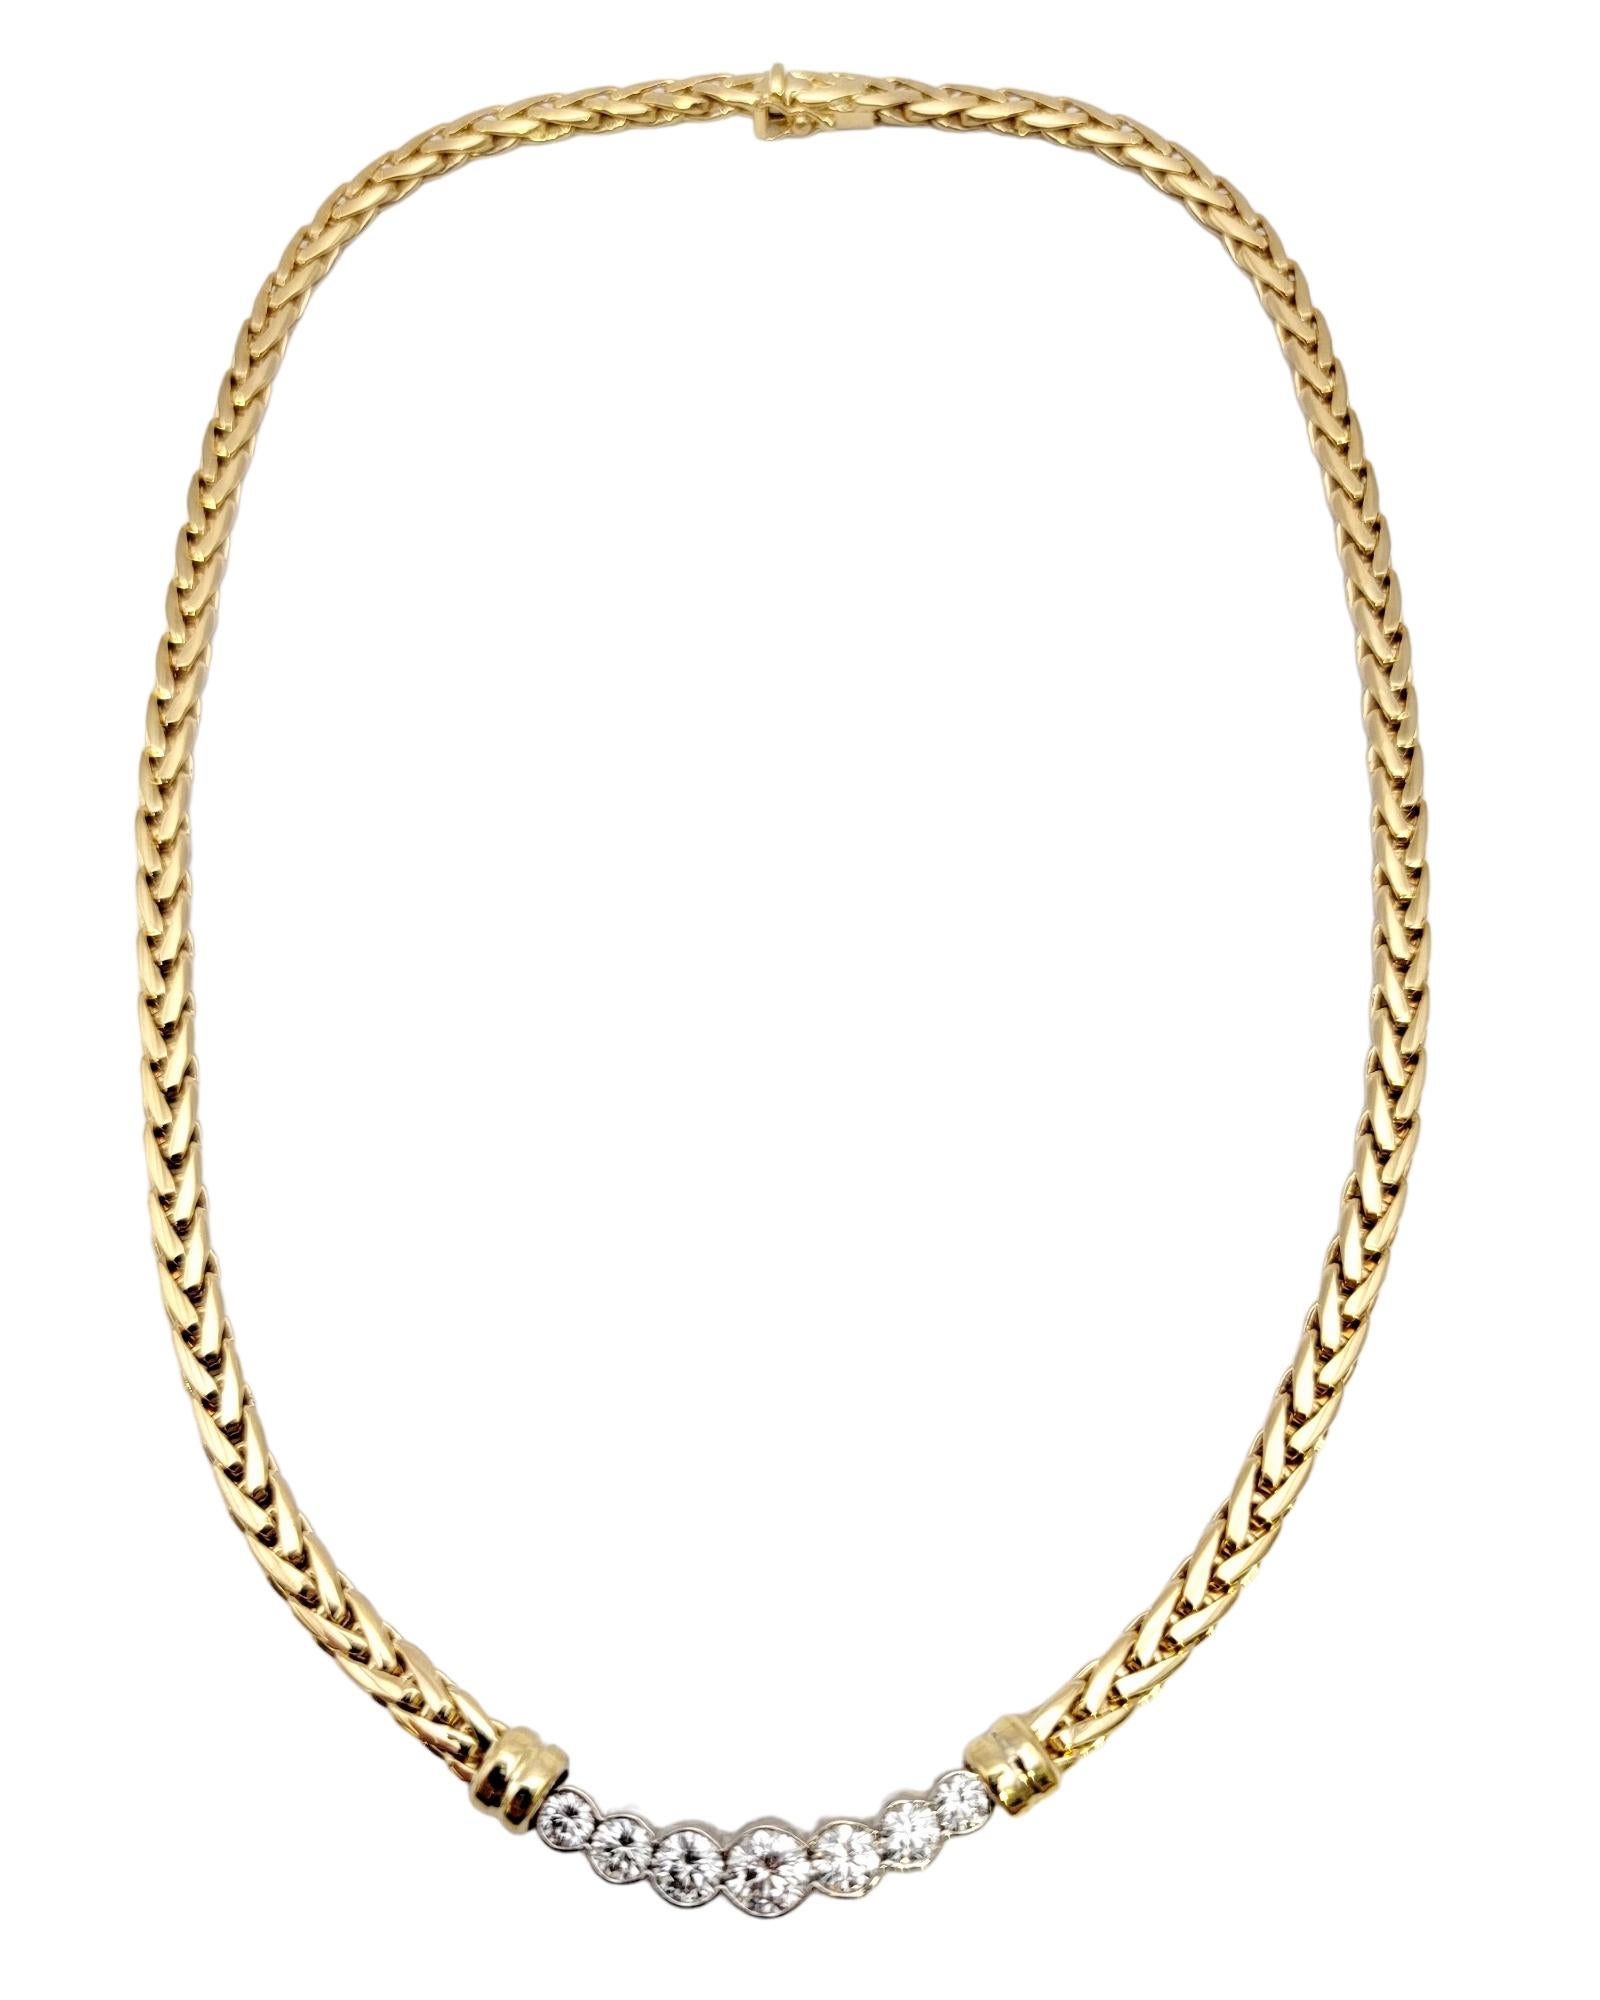 Contemporary 18 Karat Yellow Gold Wheat Chain and 7 Round Diamond Bar Choker Collar Necklace For Sale